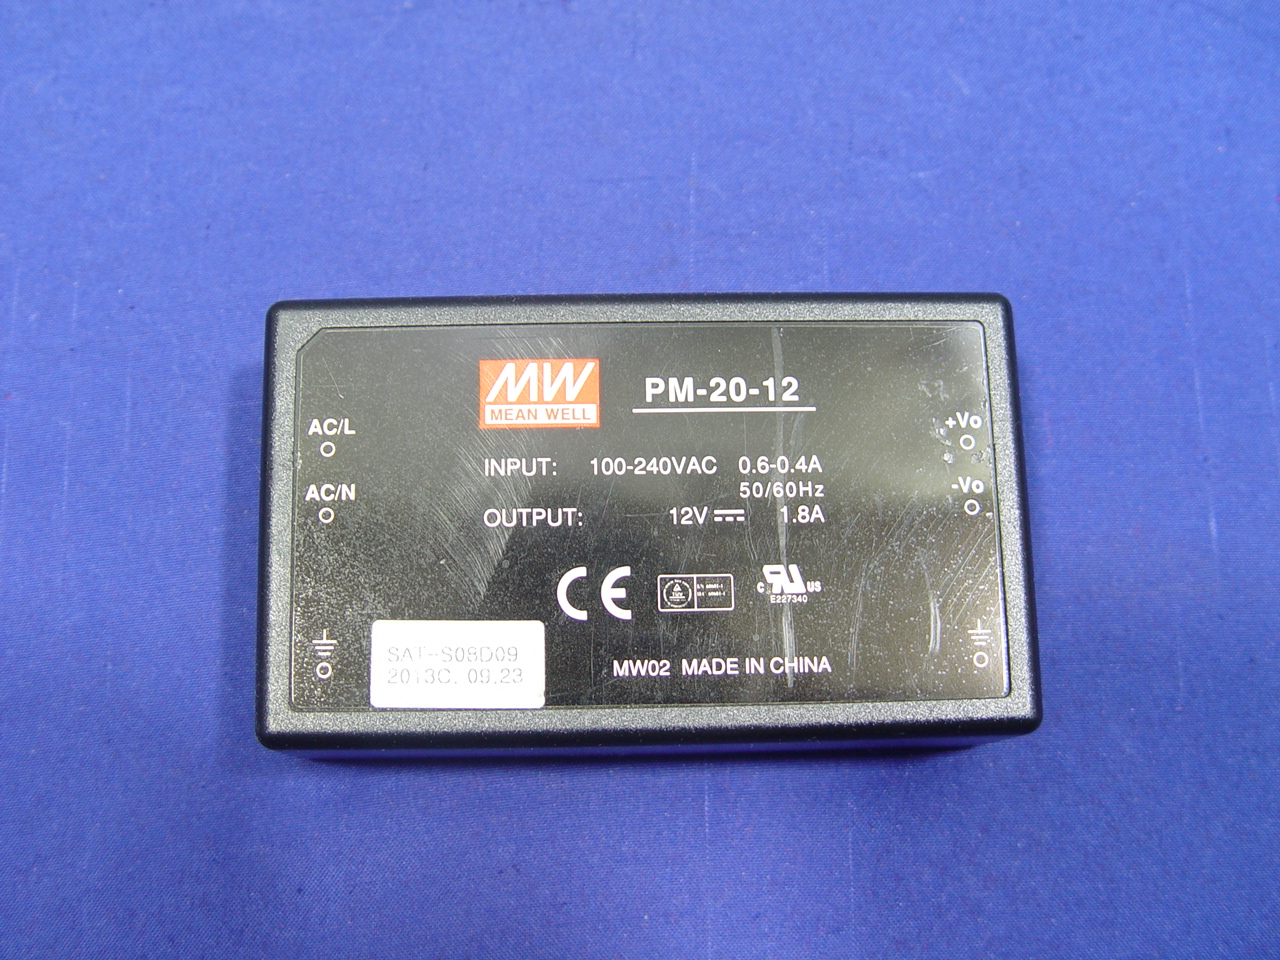 [Y736] MEAN WELL PCB TYPE PM-20-12 DC 12V 1.8A